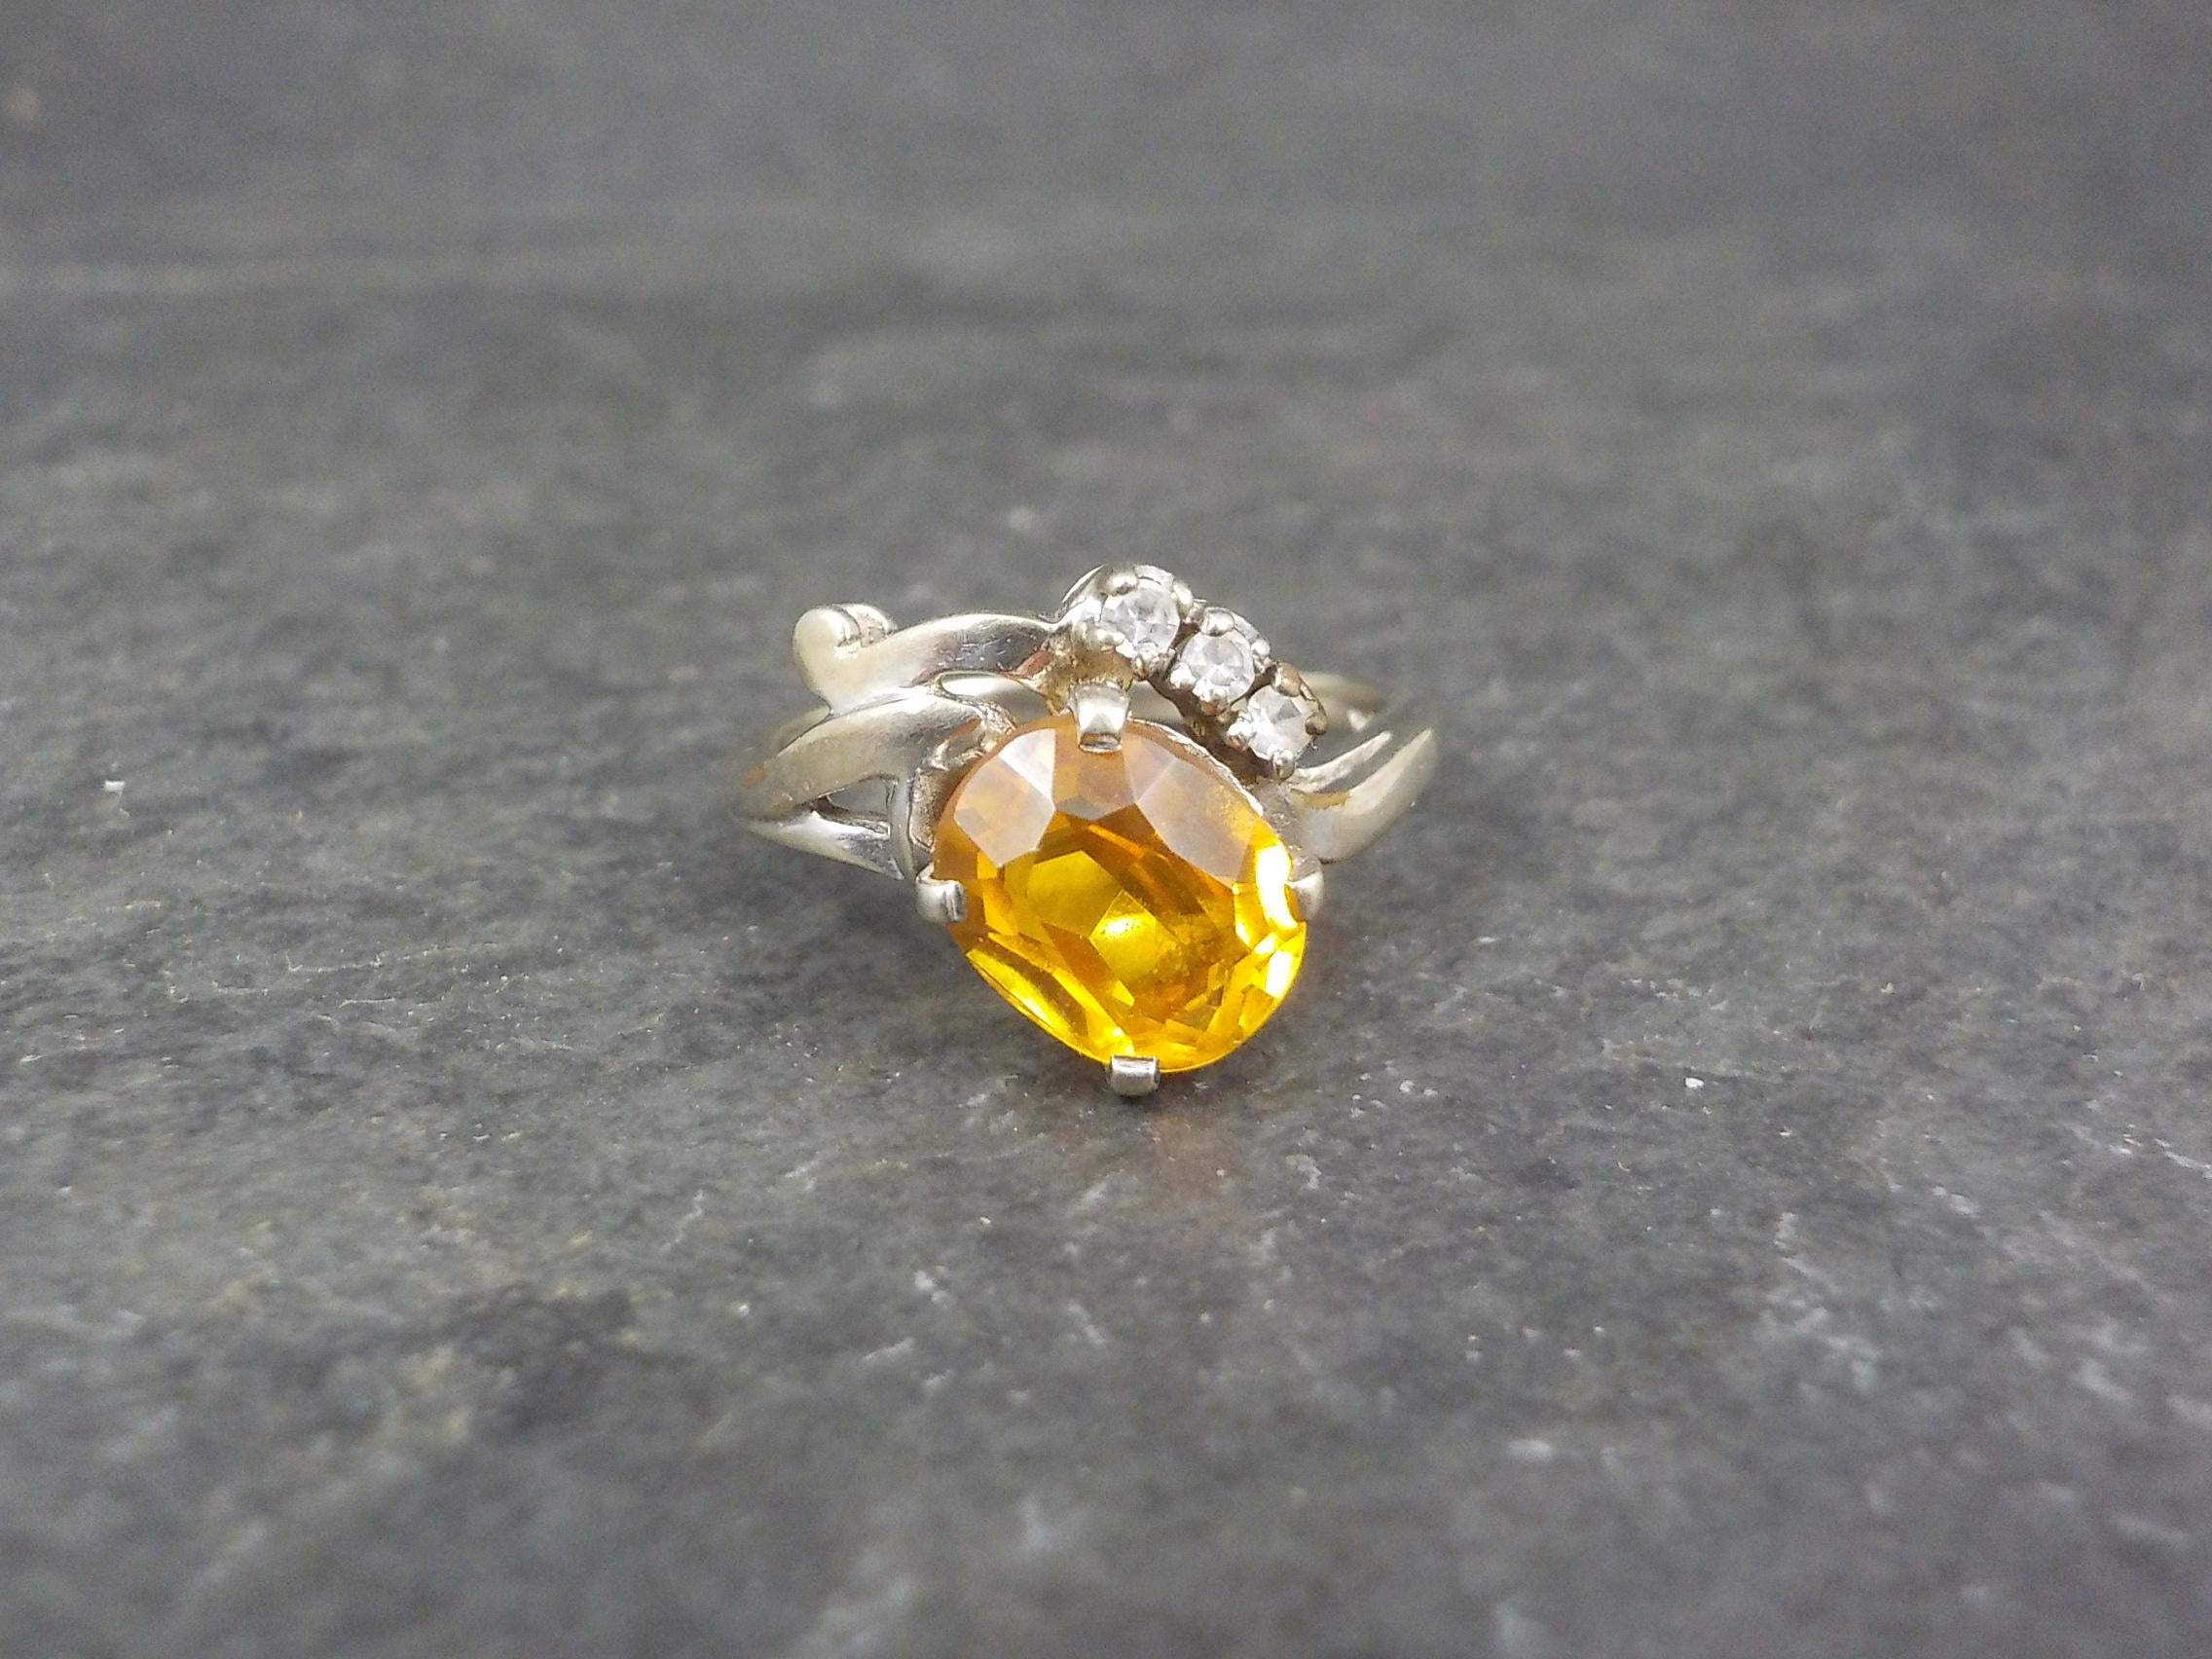 This beautiful vintage ring is 10K white gold.
It features a 7x9mm yellow orange sapphire accented by white topaz gemstones.

The face of this ring measures 1/2 of an inch north to south.
Size: 8
Marks: 10K

Condition: Excellent